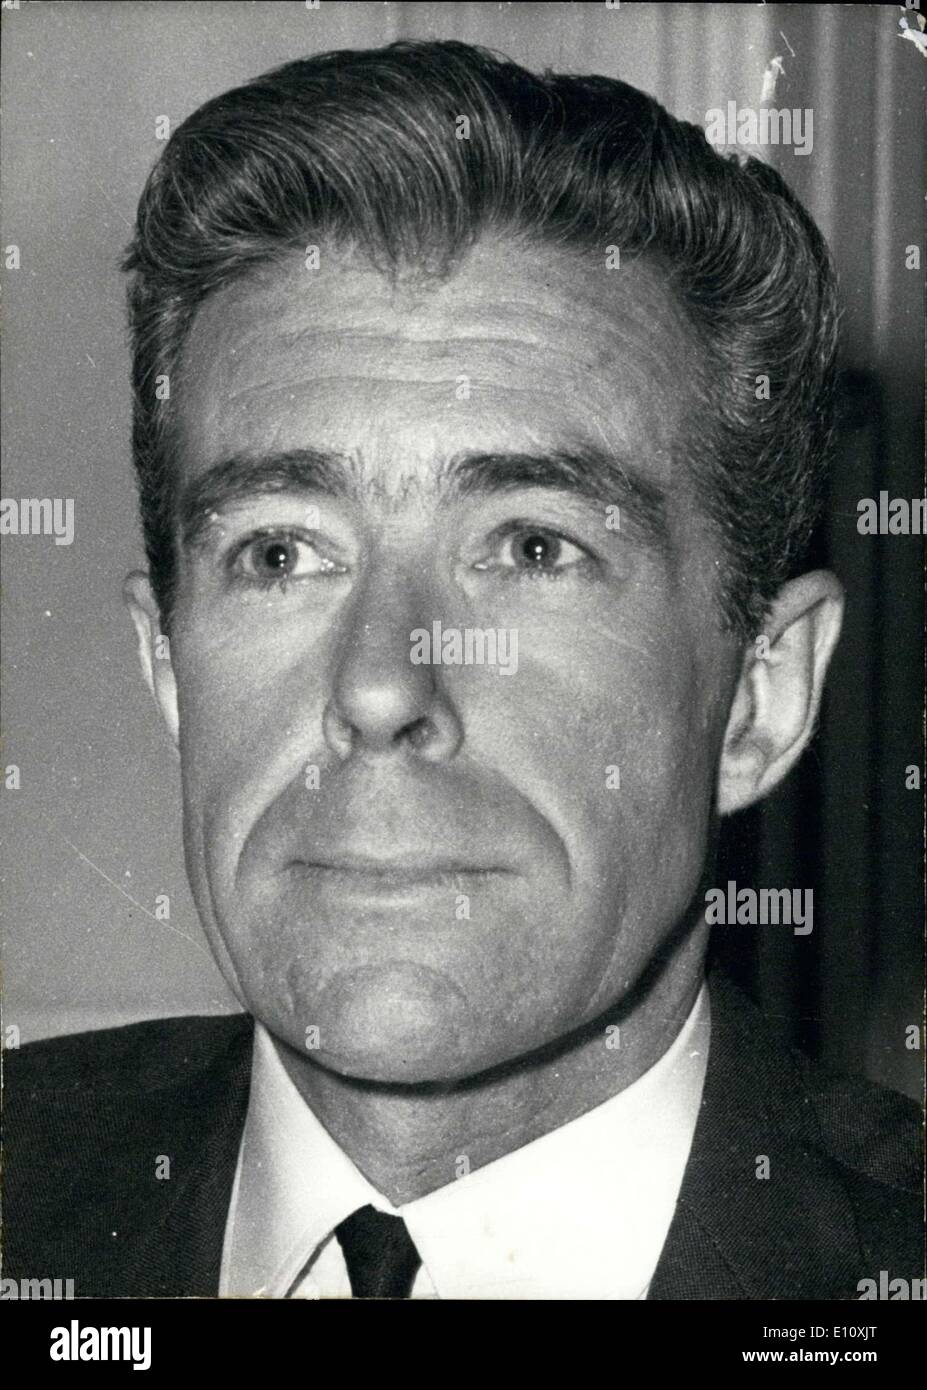 May 29, 1974 - Jean-Jacques Servan-Schreiber Stock Photo - Alamy